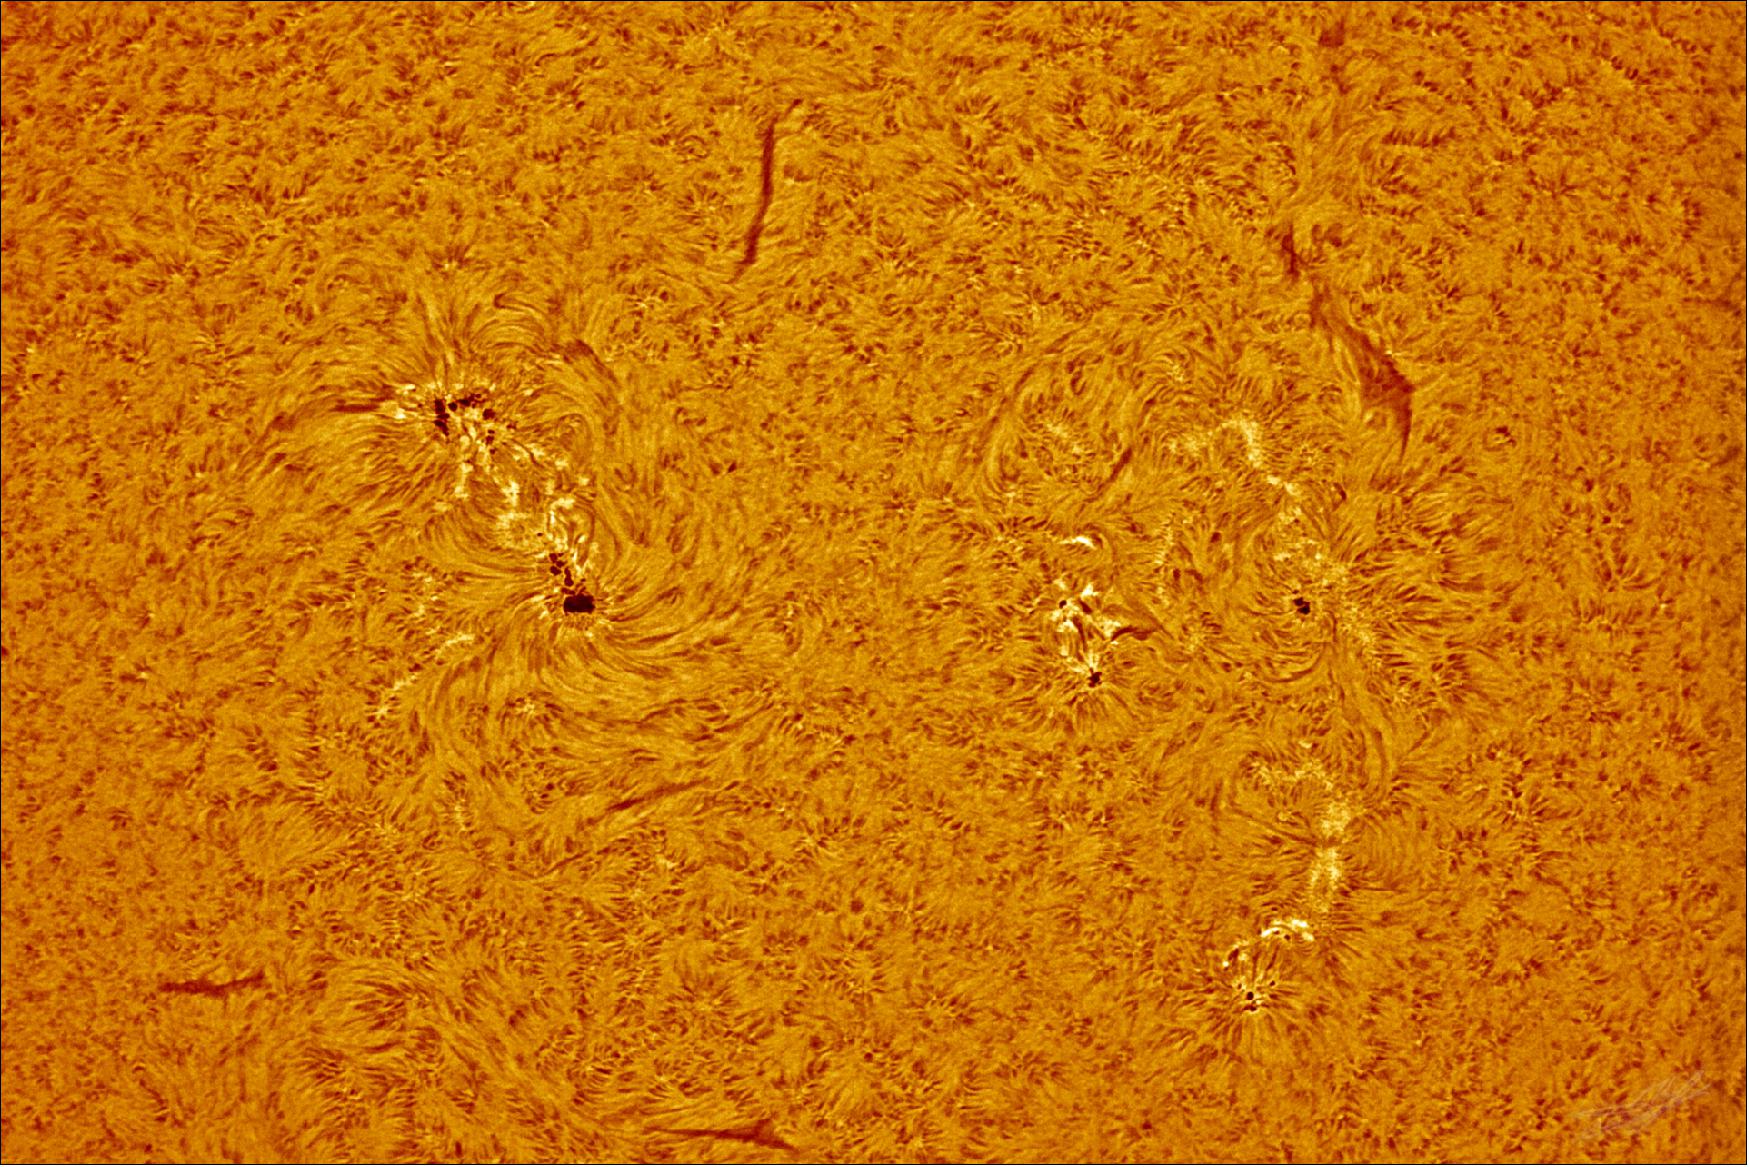 Figure 10: This image shows a snippet of the Sun up close, revealing a golden surface marked by a number of dark, blotchy sunspots, curving filaments, and lighter patches known as ‘plages' – brighter regions often found near sunspots. The width of the image would cover roughly a third of the diameter of the solar disc (image credit: ESA/ESAC/CESAR, A. de Burgos)